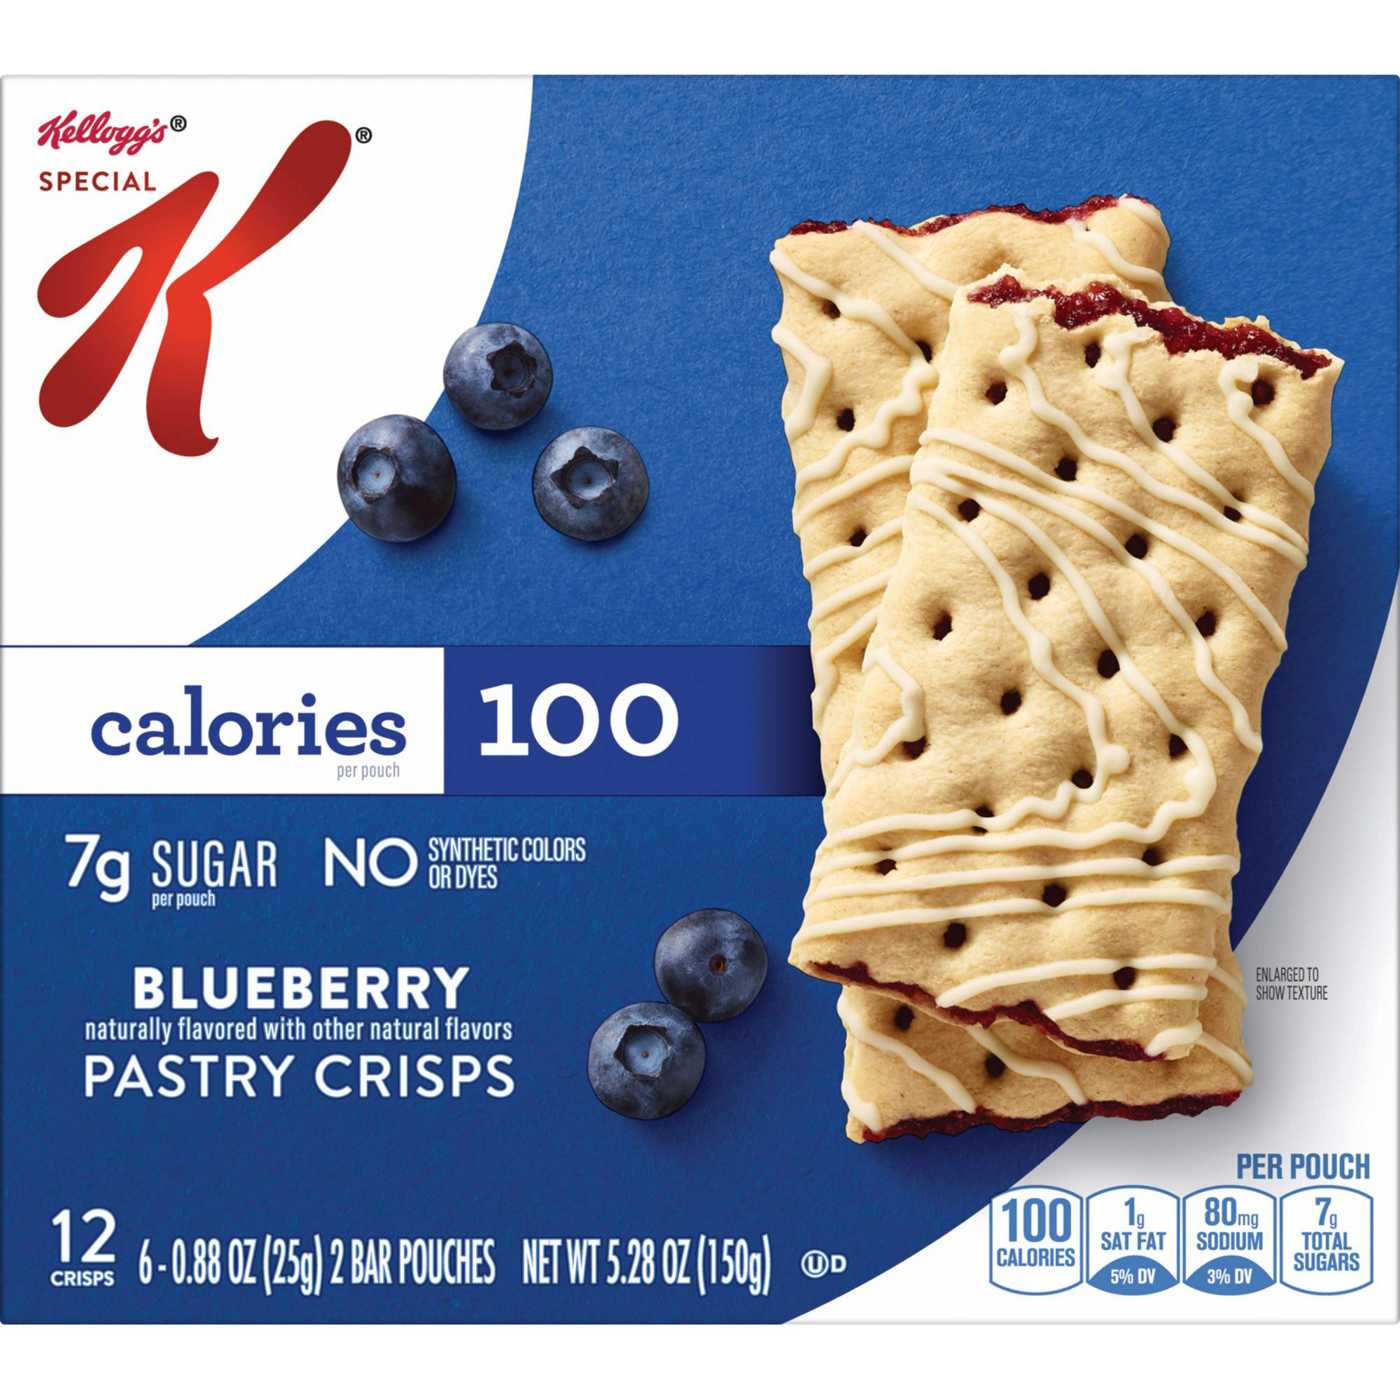 Kellogg's Special K Blueberry Pastry Crisps; image 1 of 4